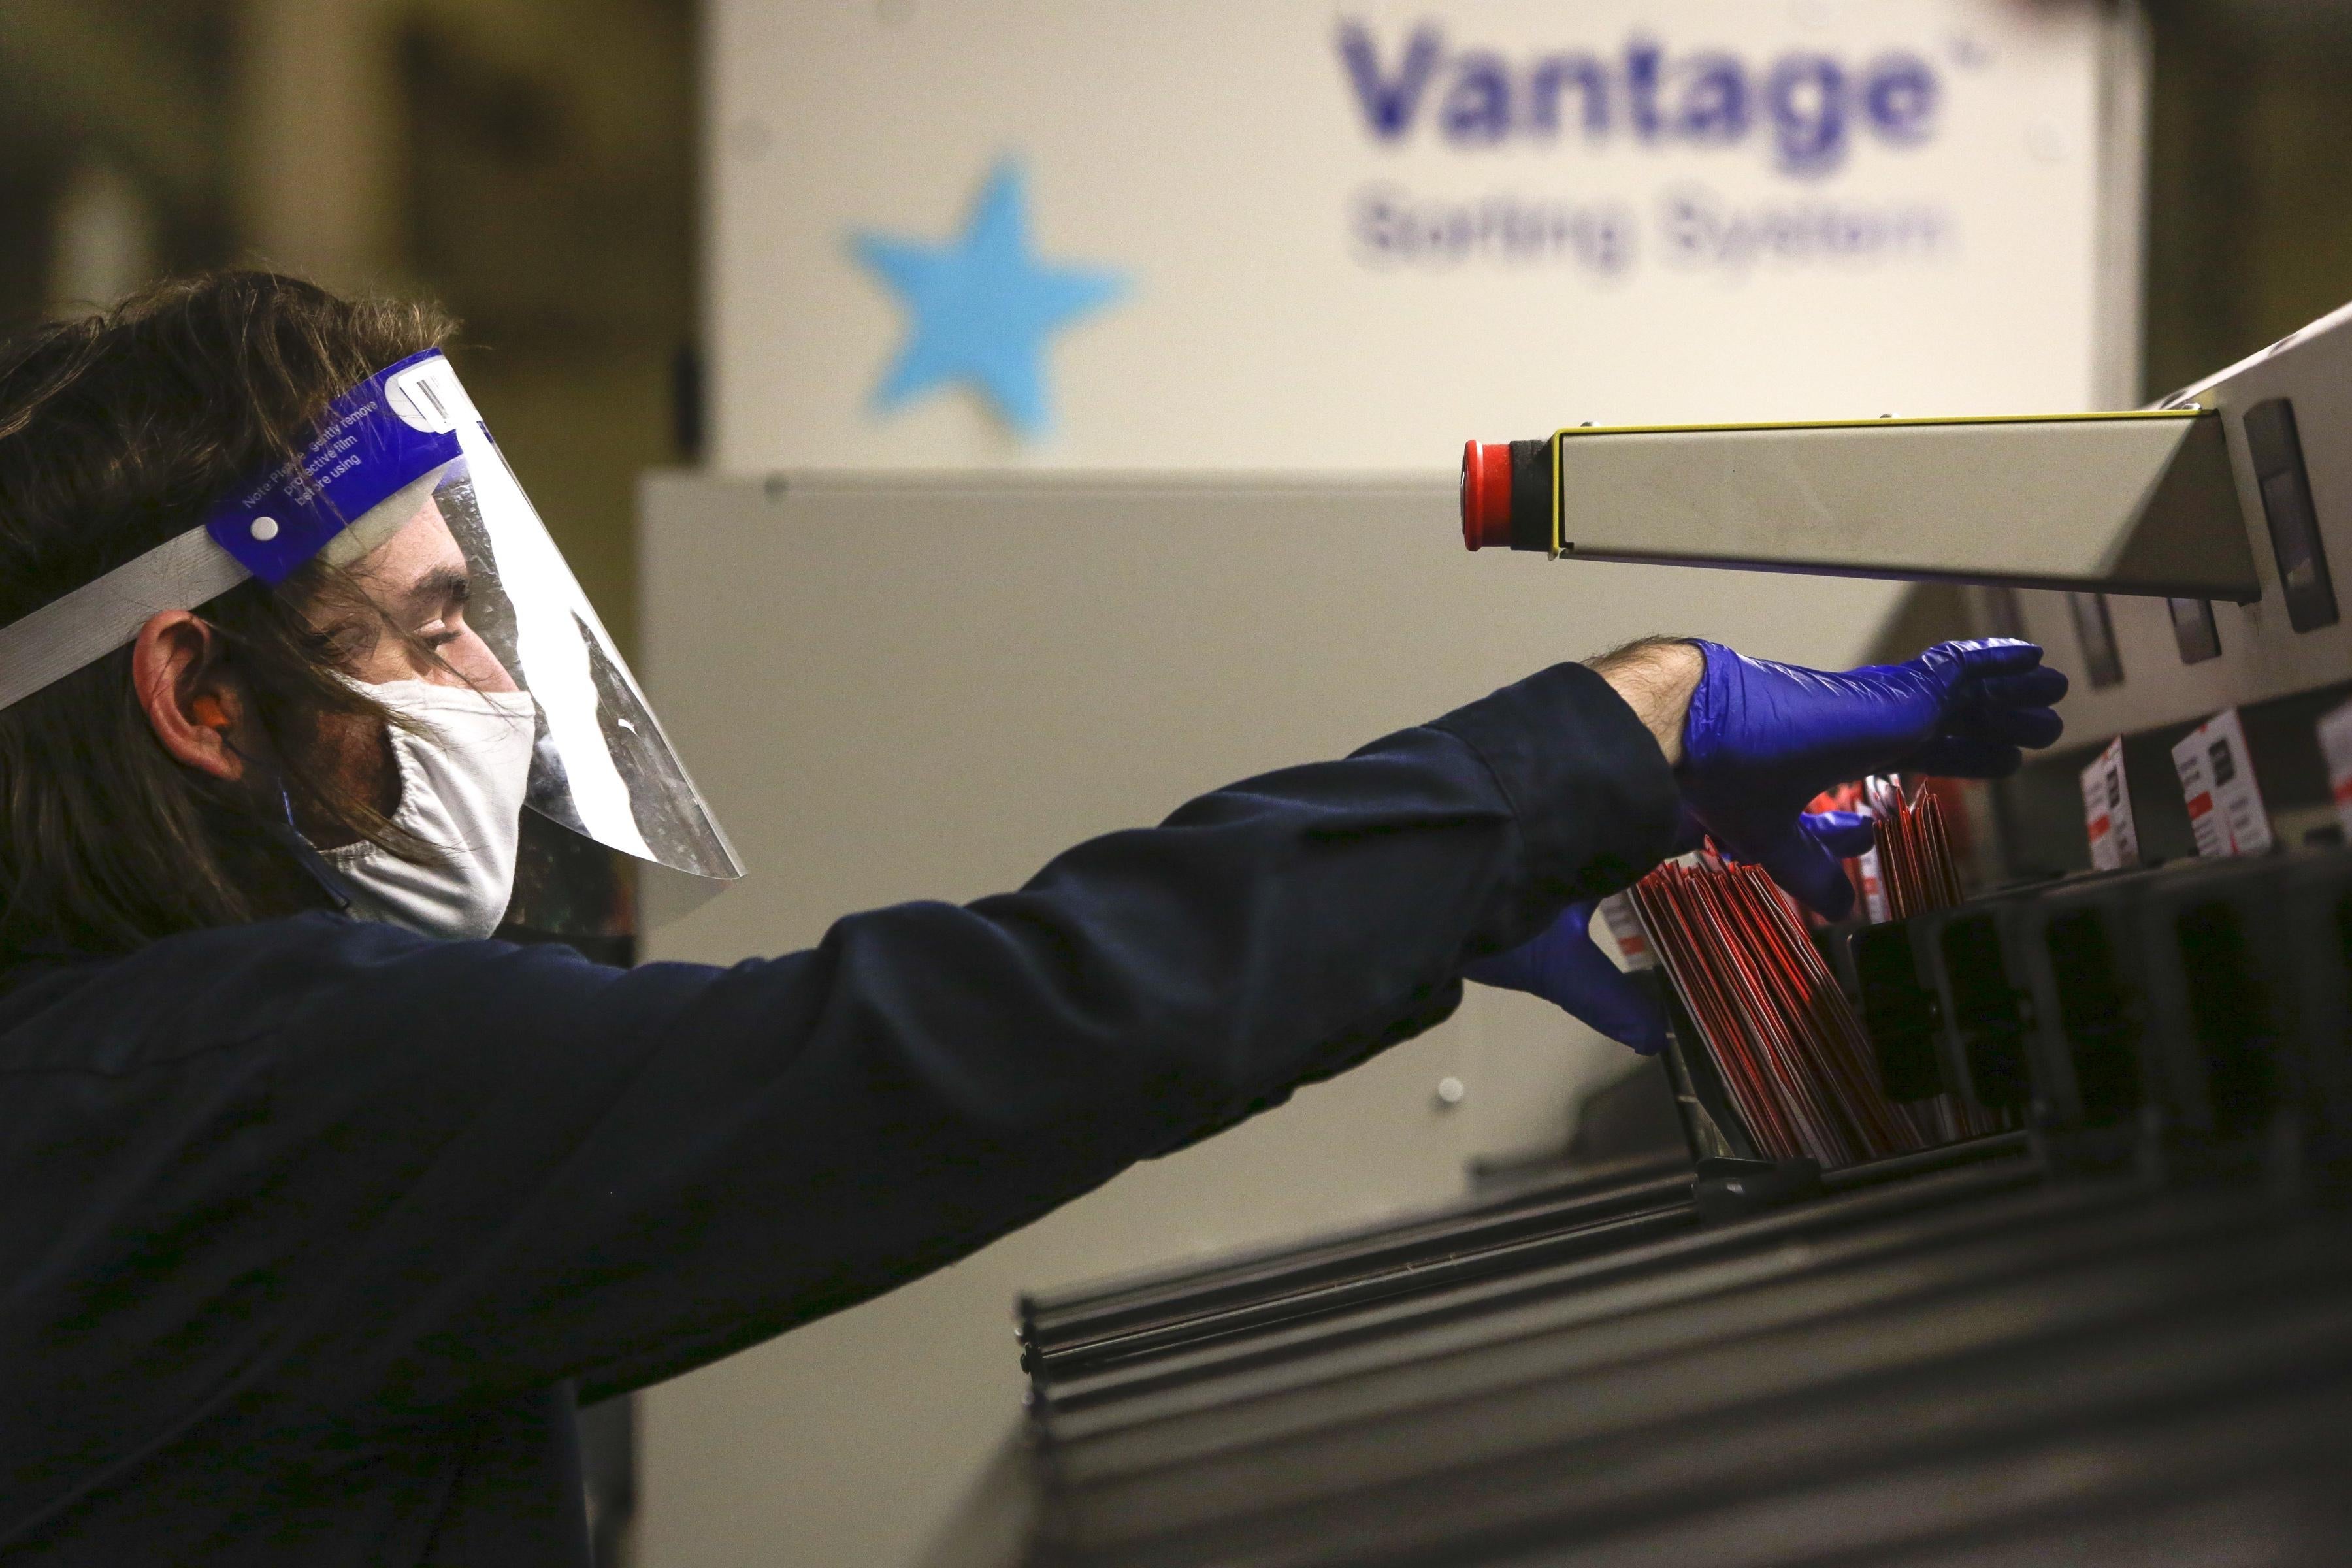 A man wearing a face shield and mask takes ballots from a sorting machine.